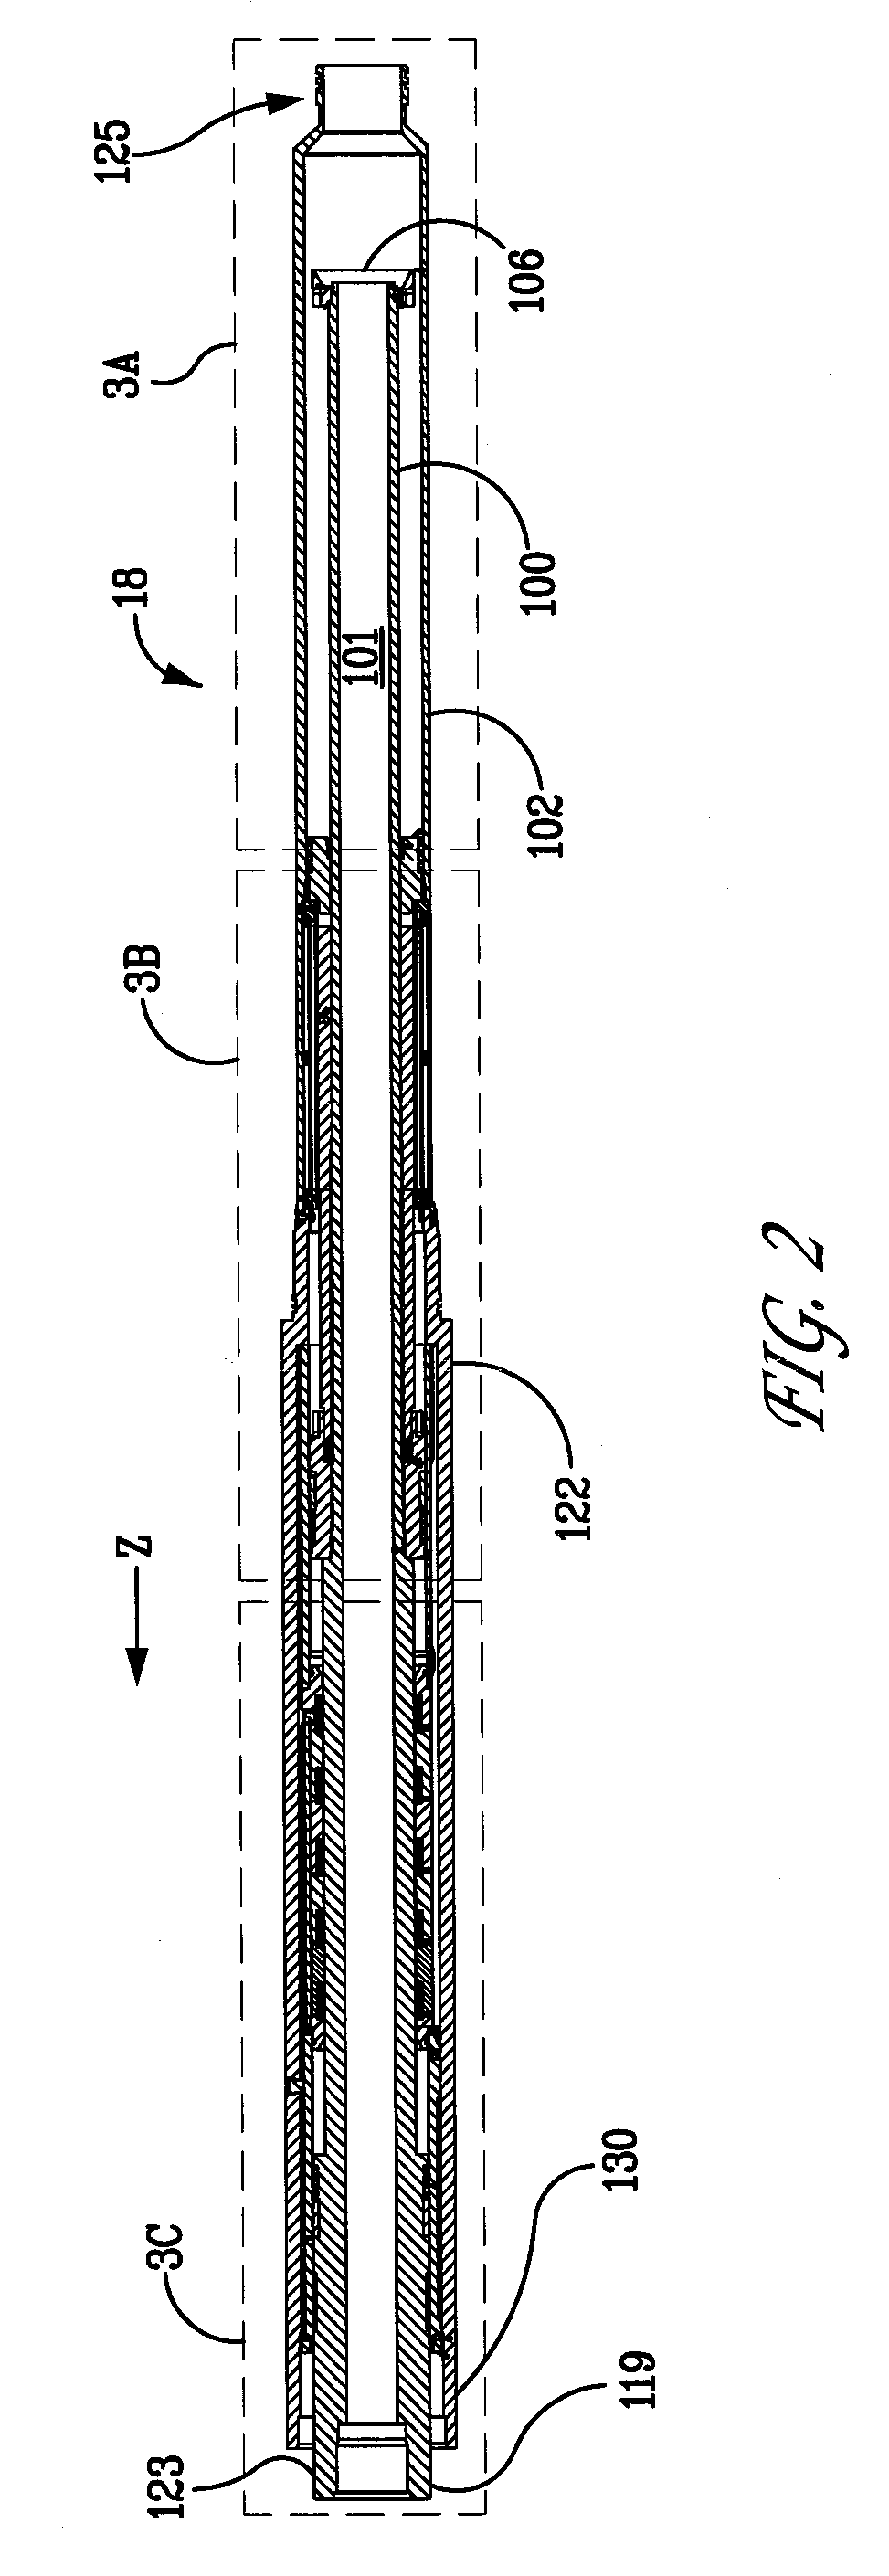 System and method for damping vibration in a drill string using a magnetorheological damper